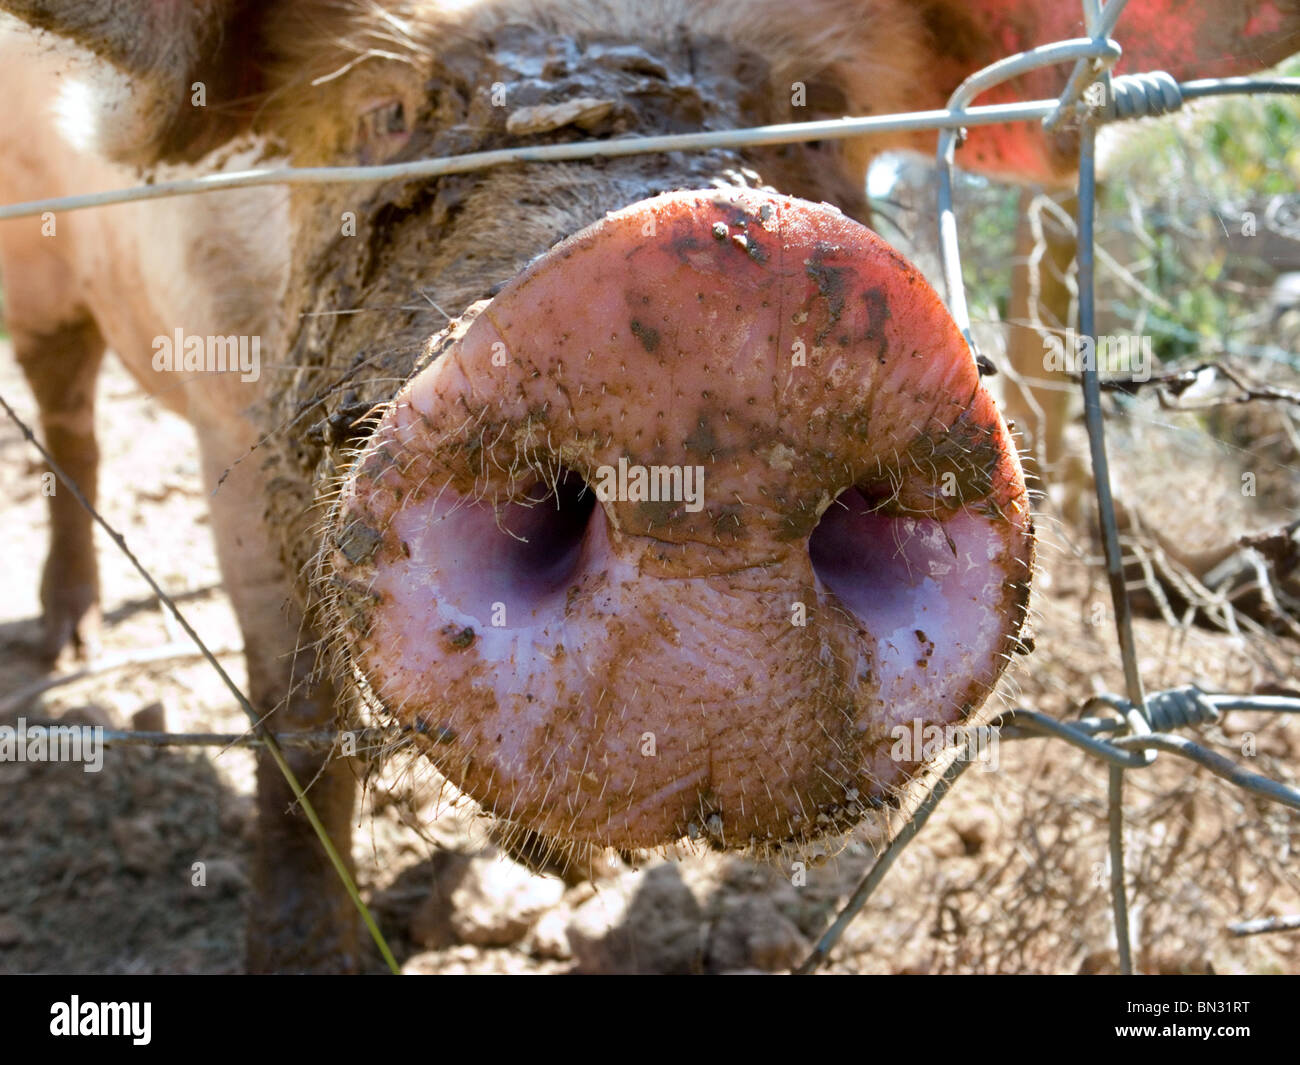 Close-up of pig's snout through fence Stock Photo